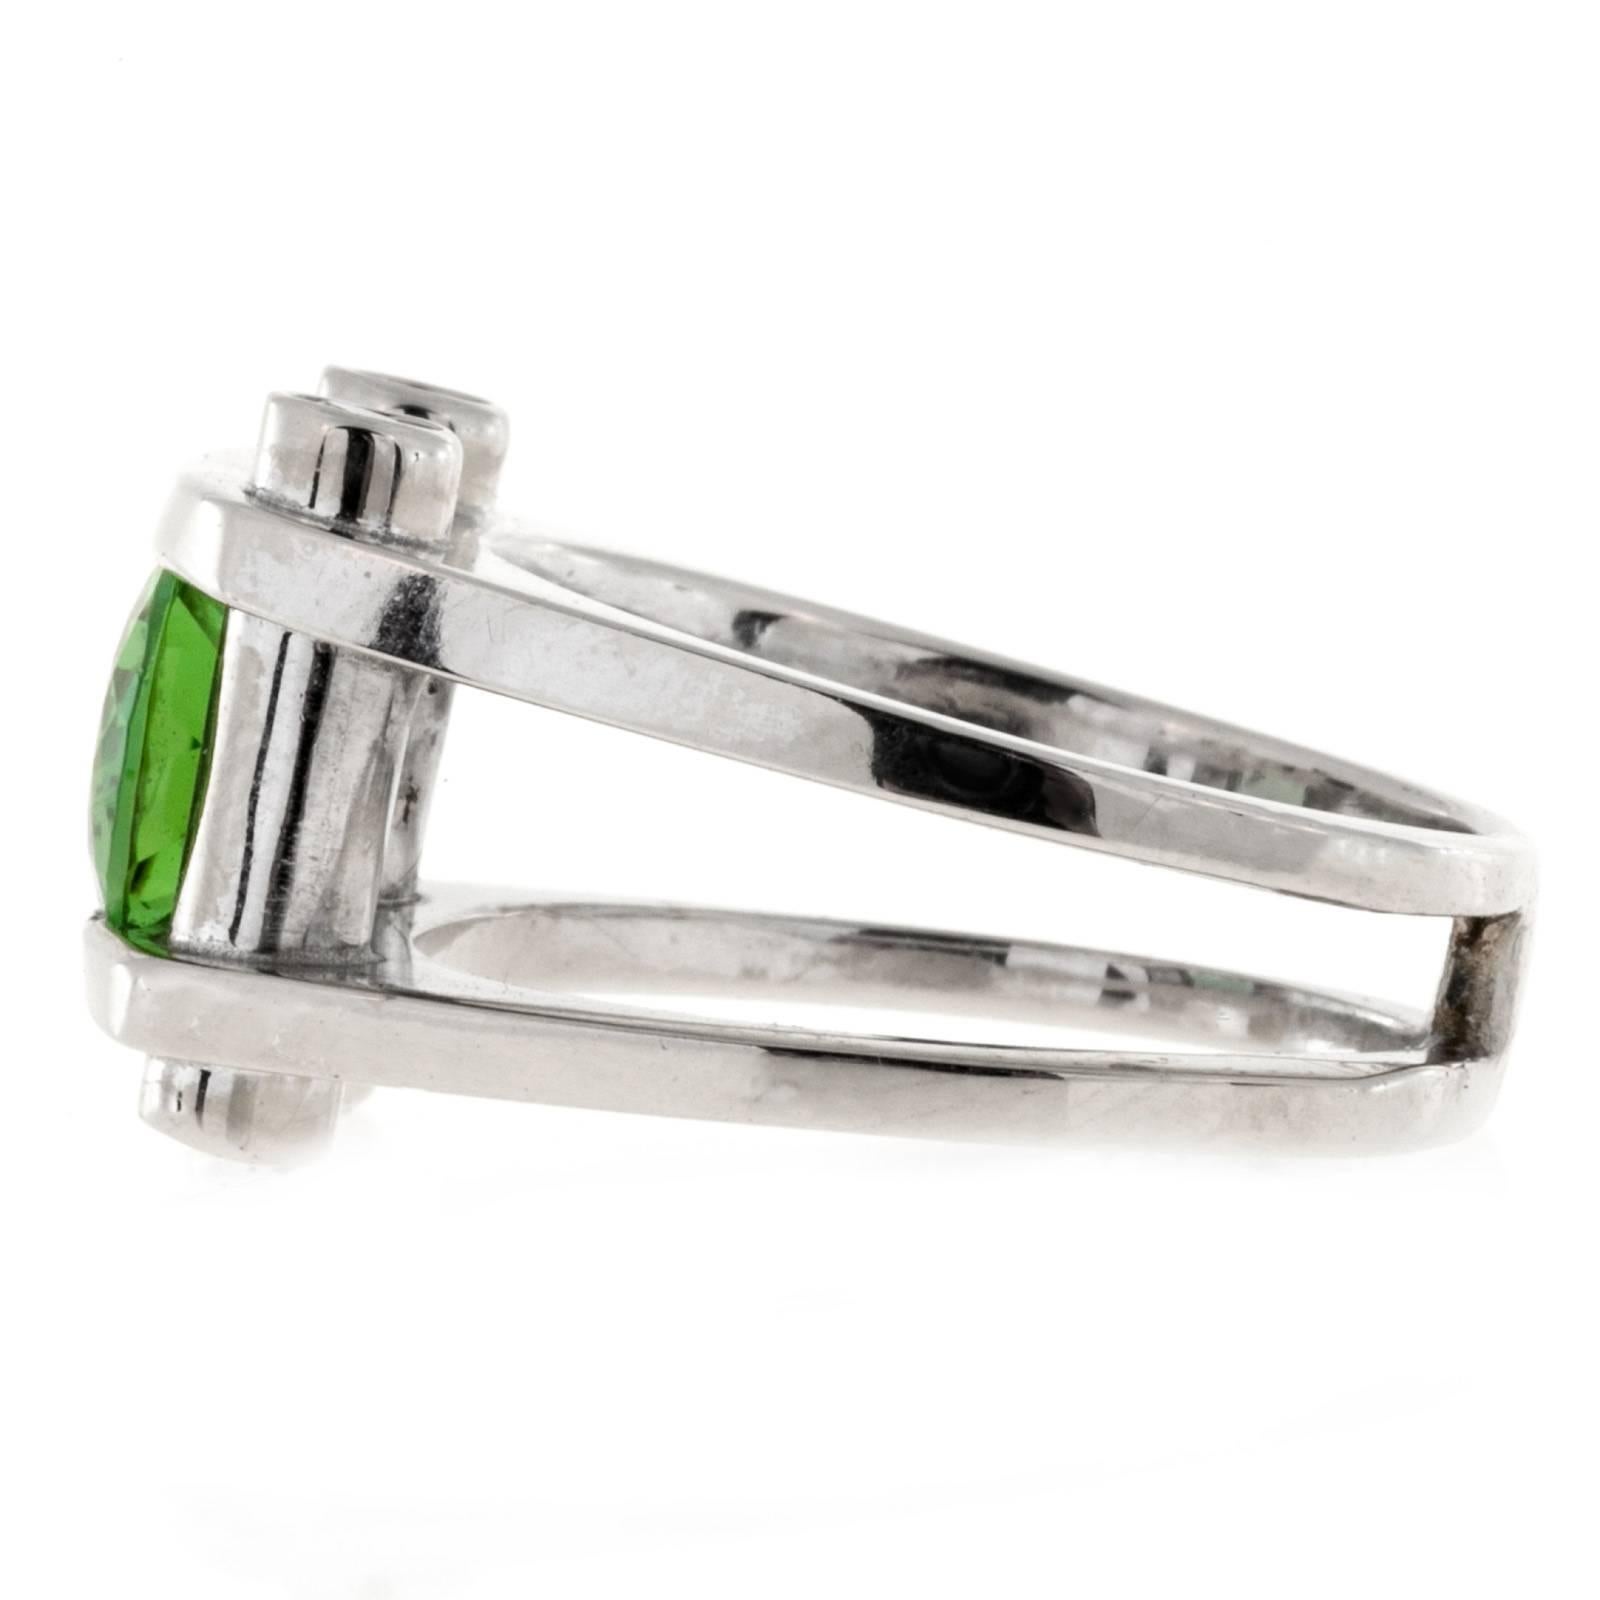 Bright green oval Tourmaline and diamond white gold ring.

1 bright green tourmaline 10 x 8mm oval, approx. total weight 2.90cts
4 full cut diamonds, approx. total weight .05ct each, G, VS2 to SI1
14k White Gold
11.7 grams
Width at top: